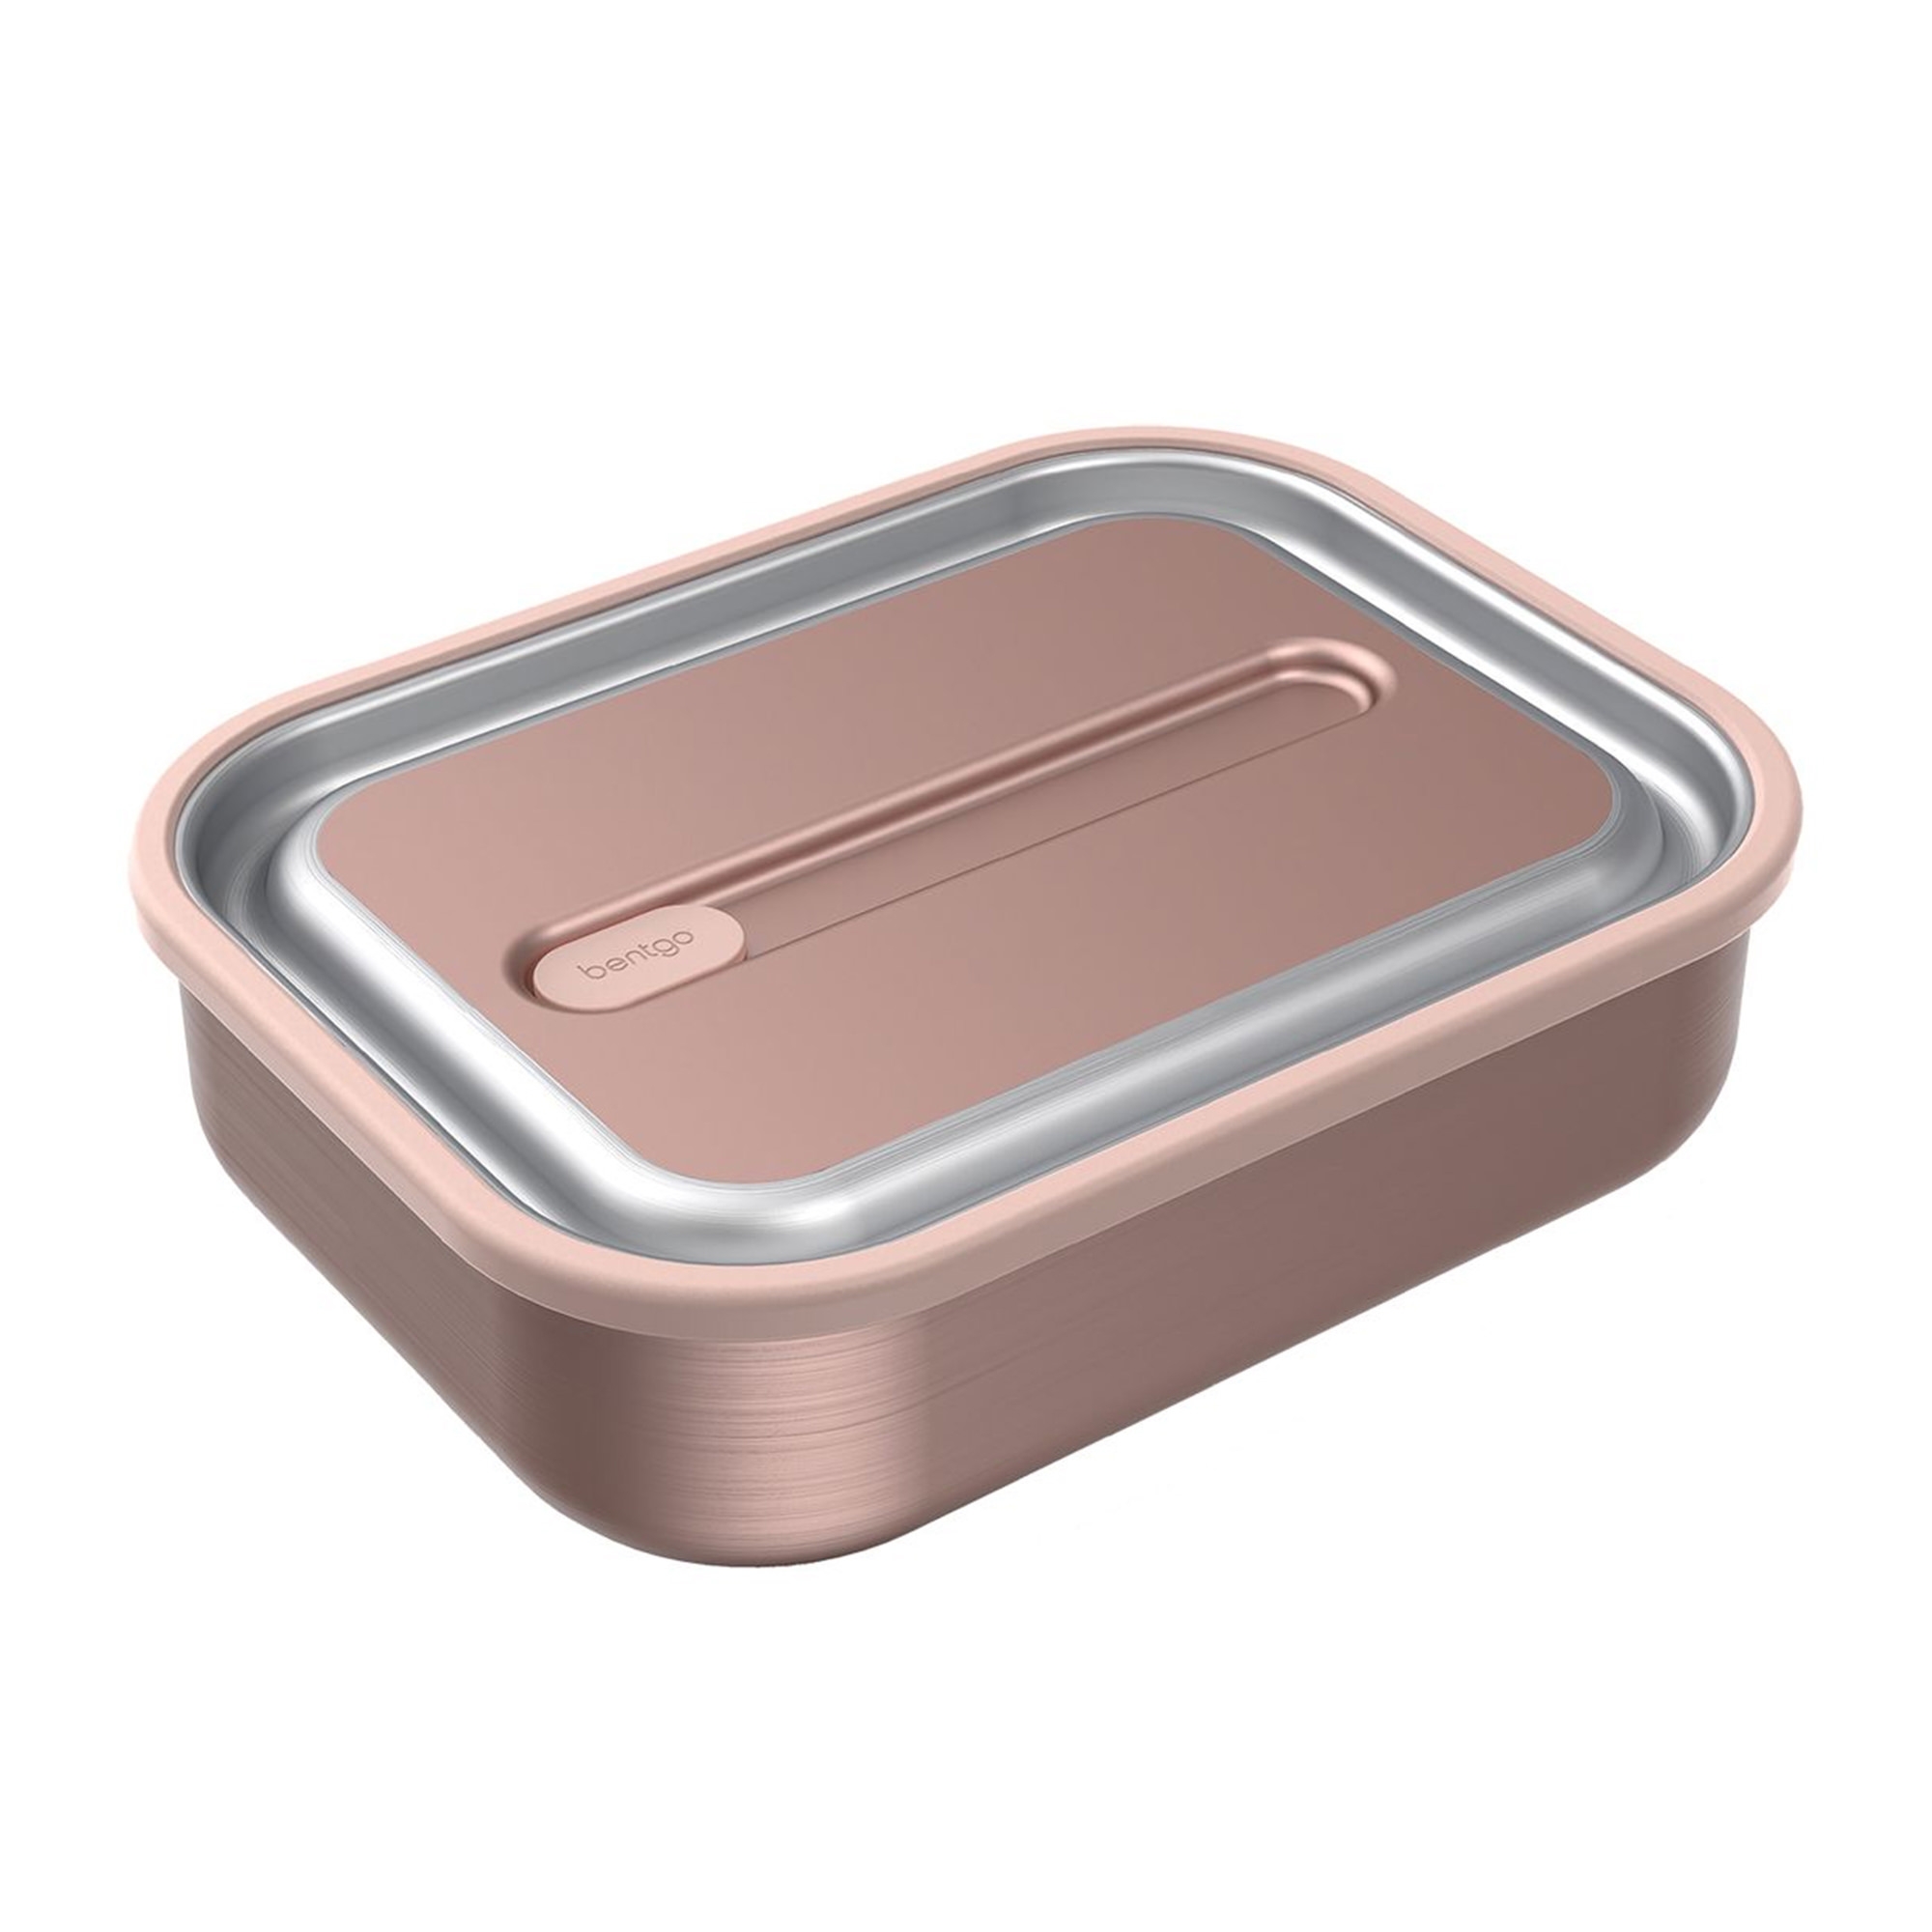 Bentgo Stainless Steel Leak Proof Lunch Box 1.2L Rose Gold Image 1